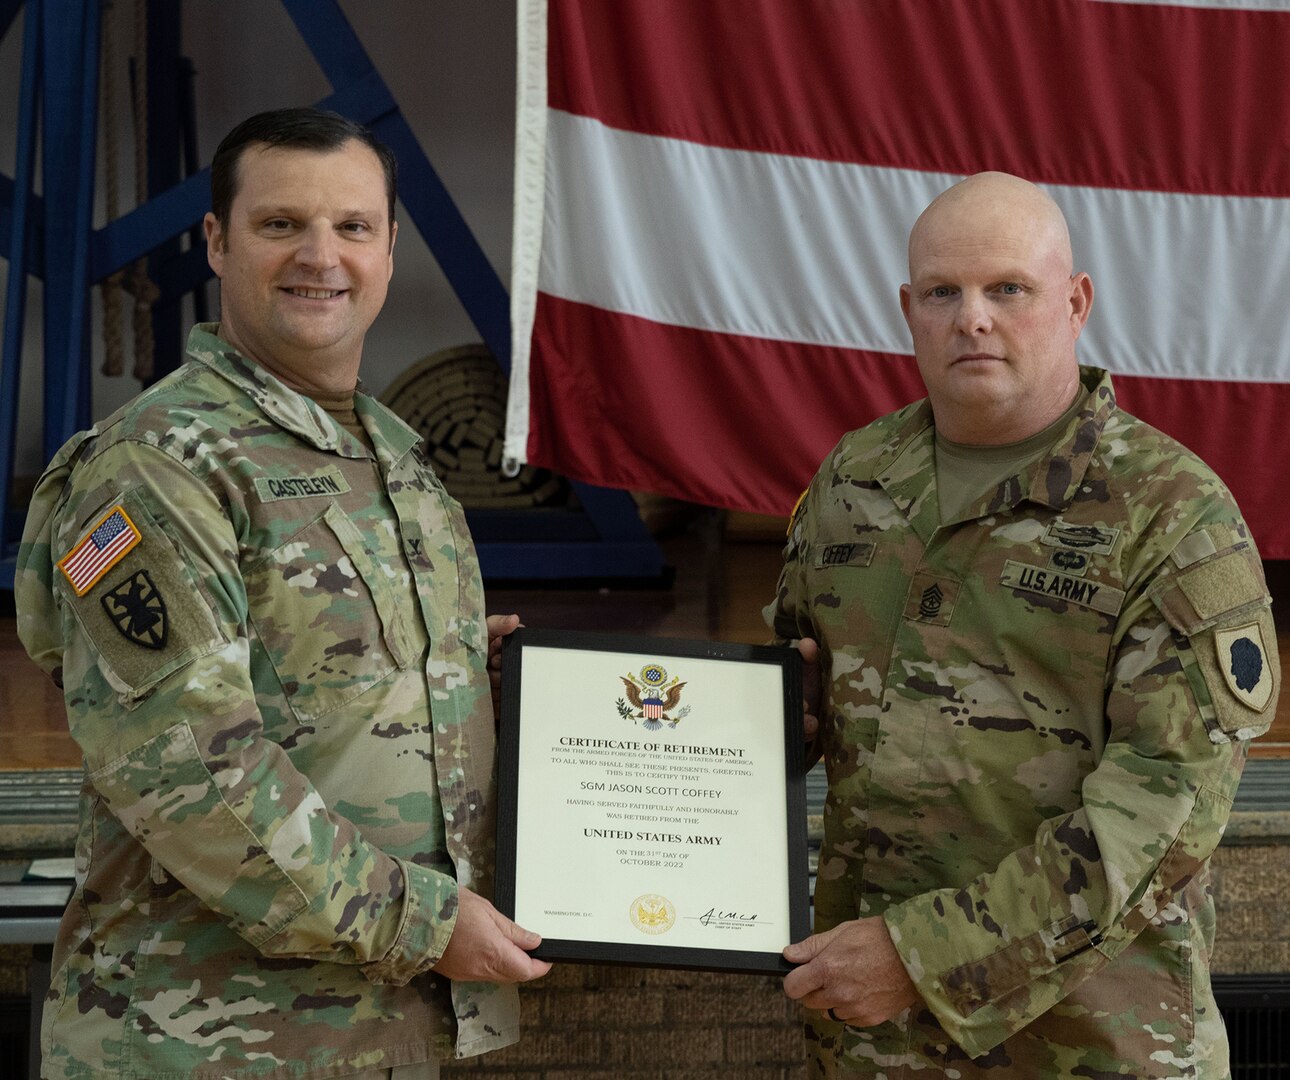 Sgt. Maj. Jason S. Coffey, of Galion, Ohio, Chief Operations noncommissioned officer, 244th Digital Liaison Detachment, based in Chicago, is presented a certificate of retirement by Col. Max Casteleyn, commander, 244th DLD, during a retirement ceremony Oct. 15 at the Northwest Armory in Chicago.